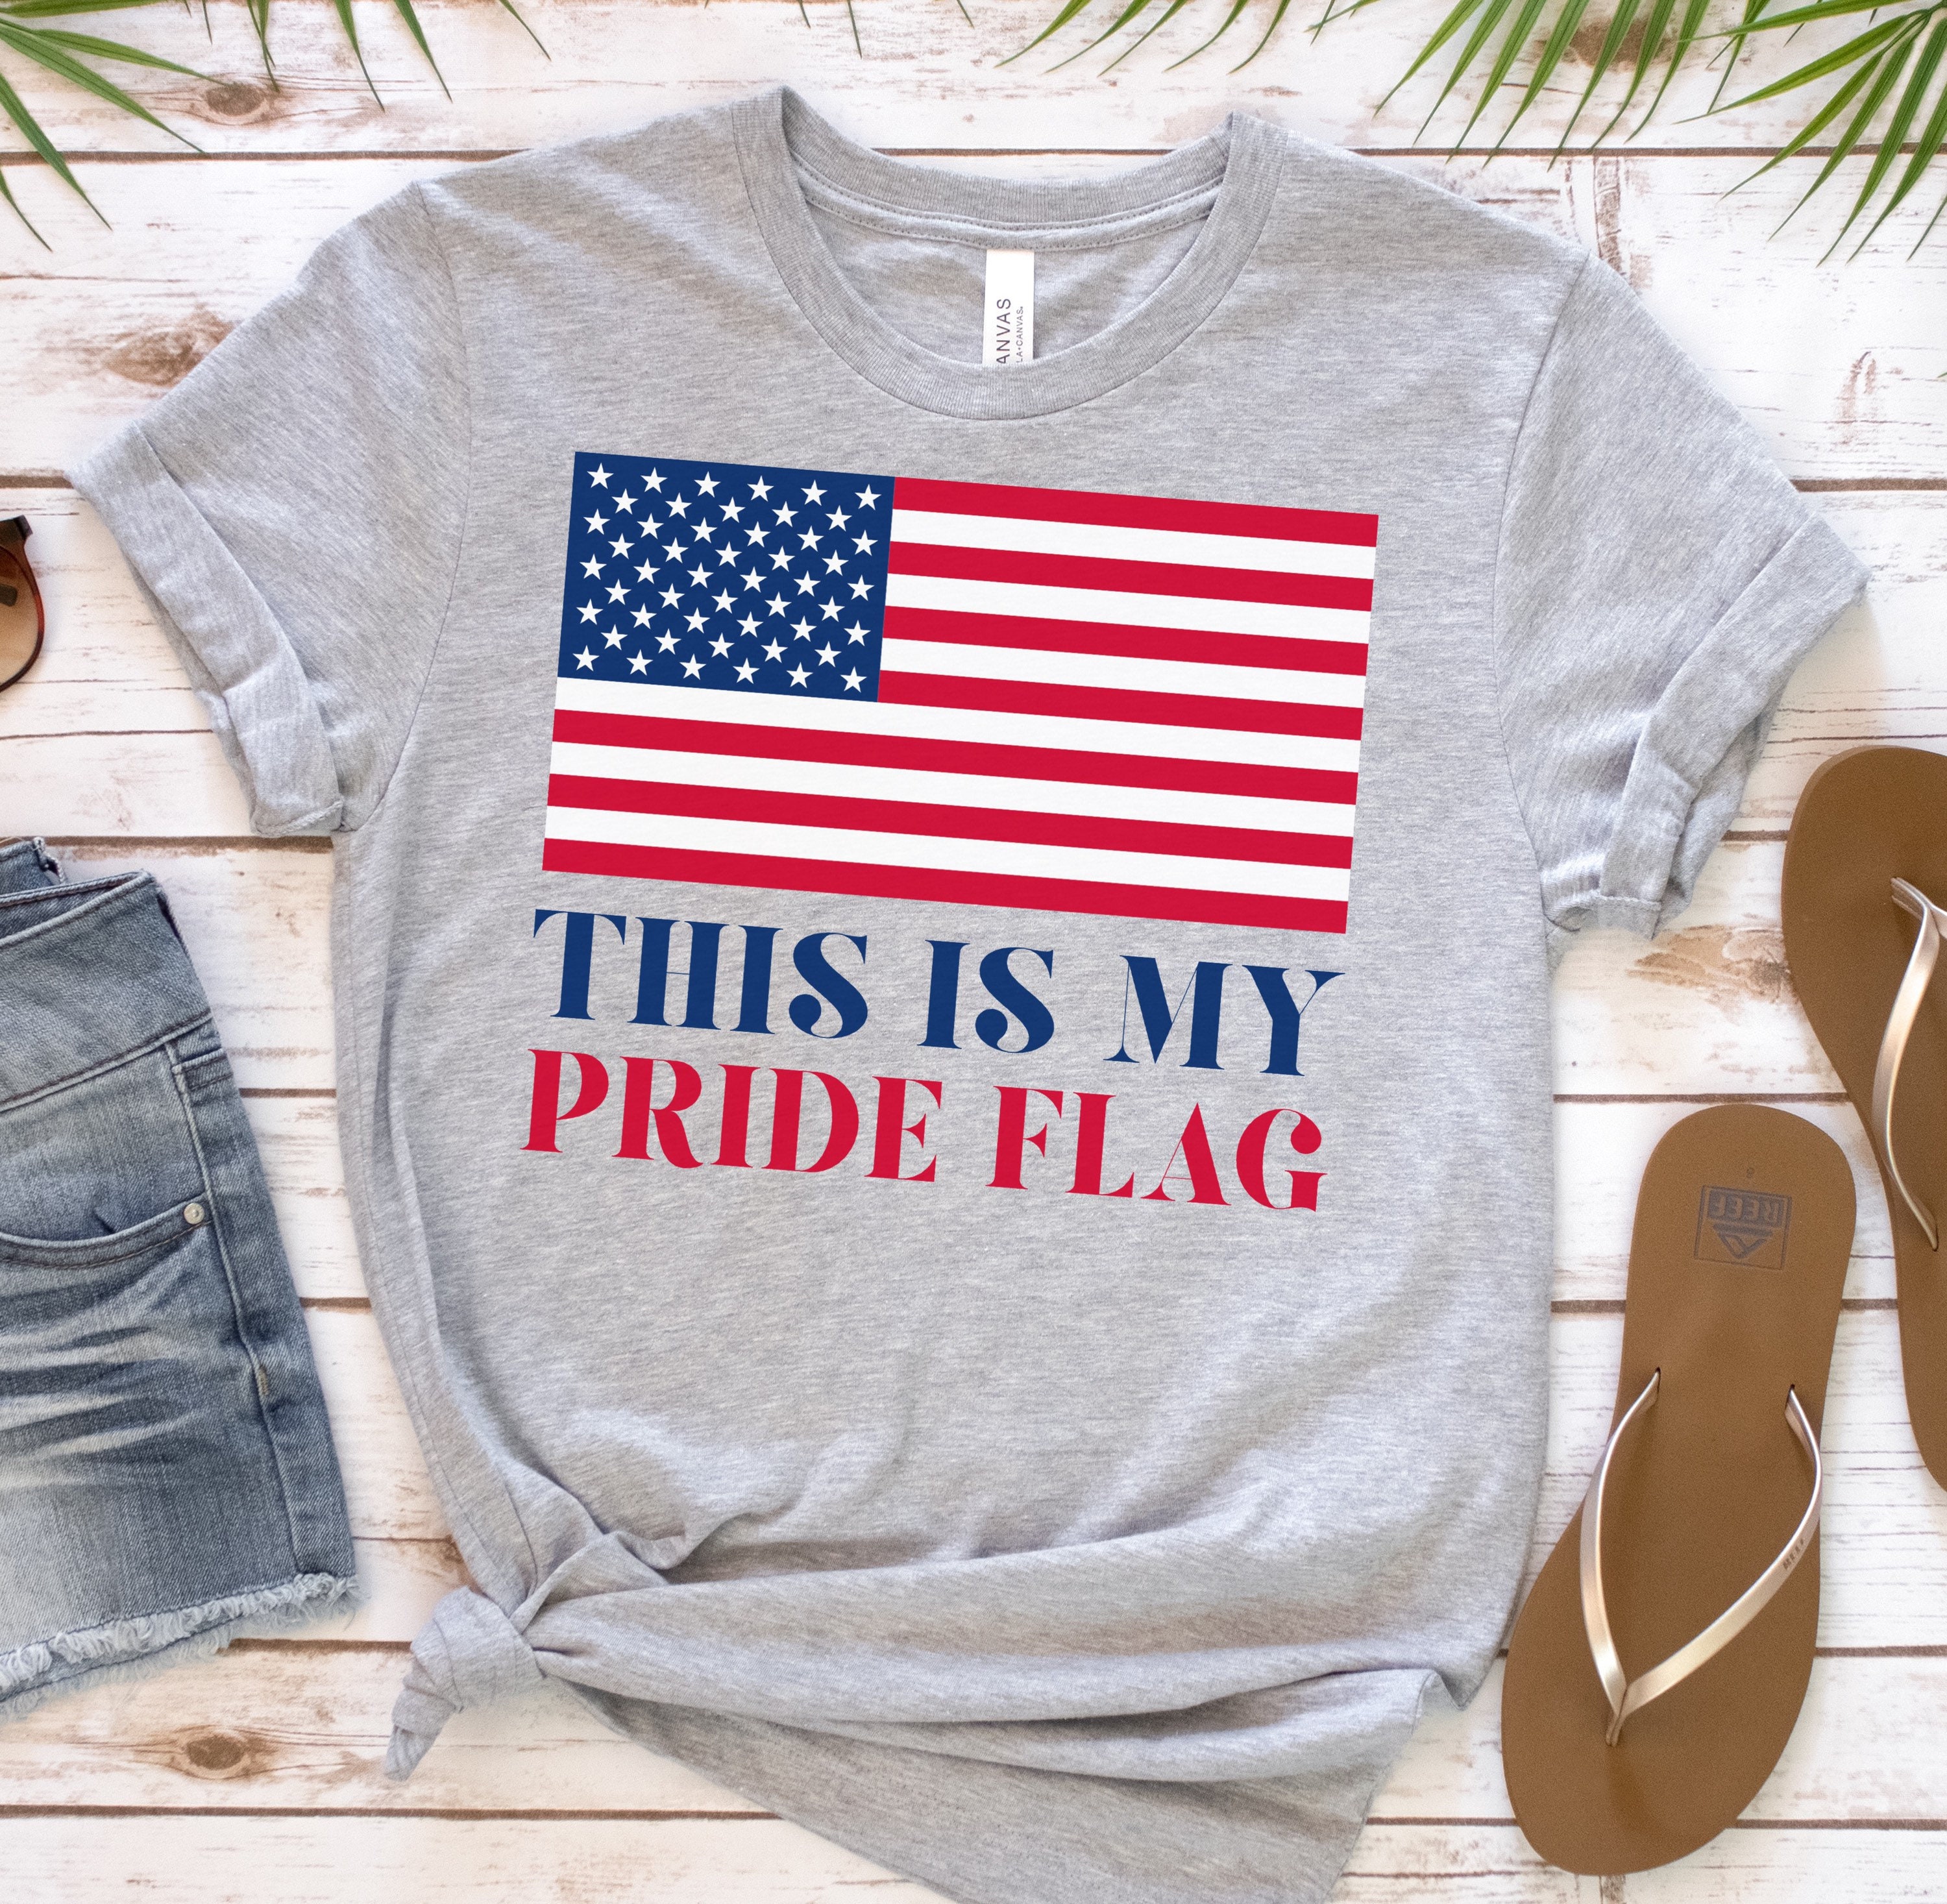 This is My Pride Flag American Flag Shirt, Conservative Patriot T